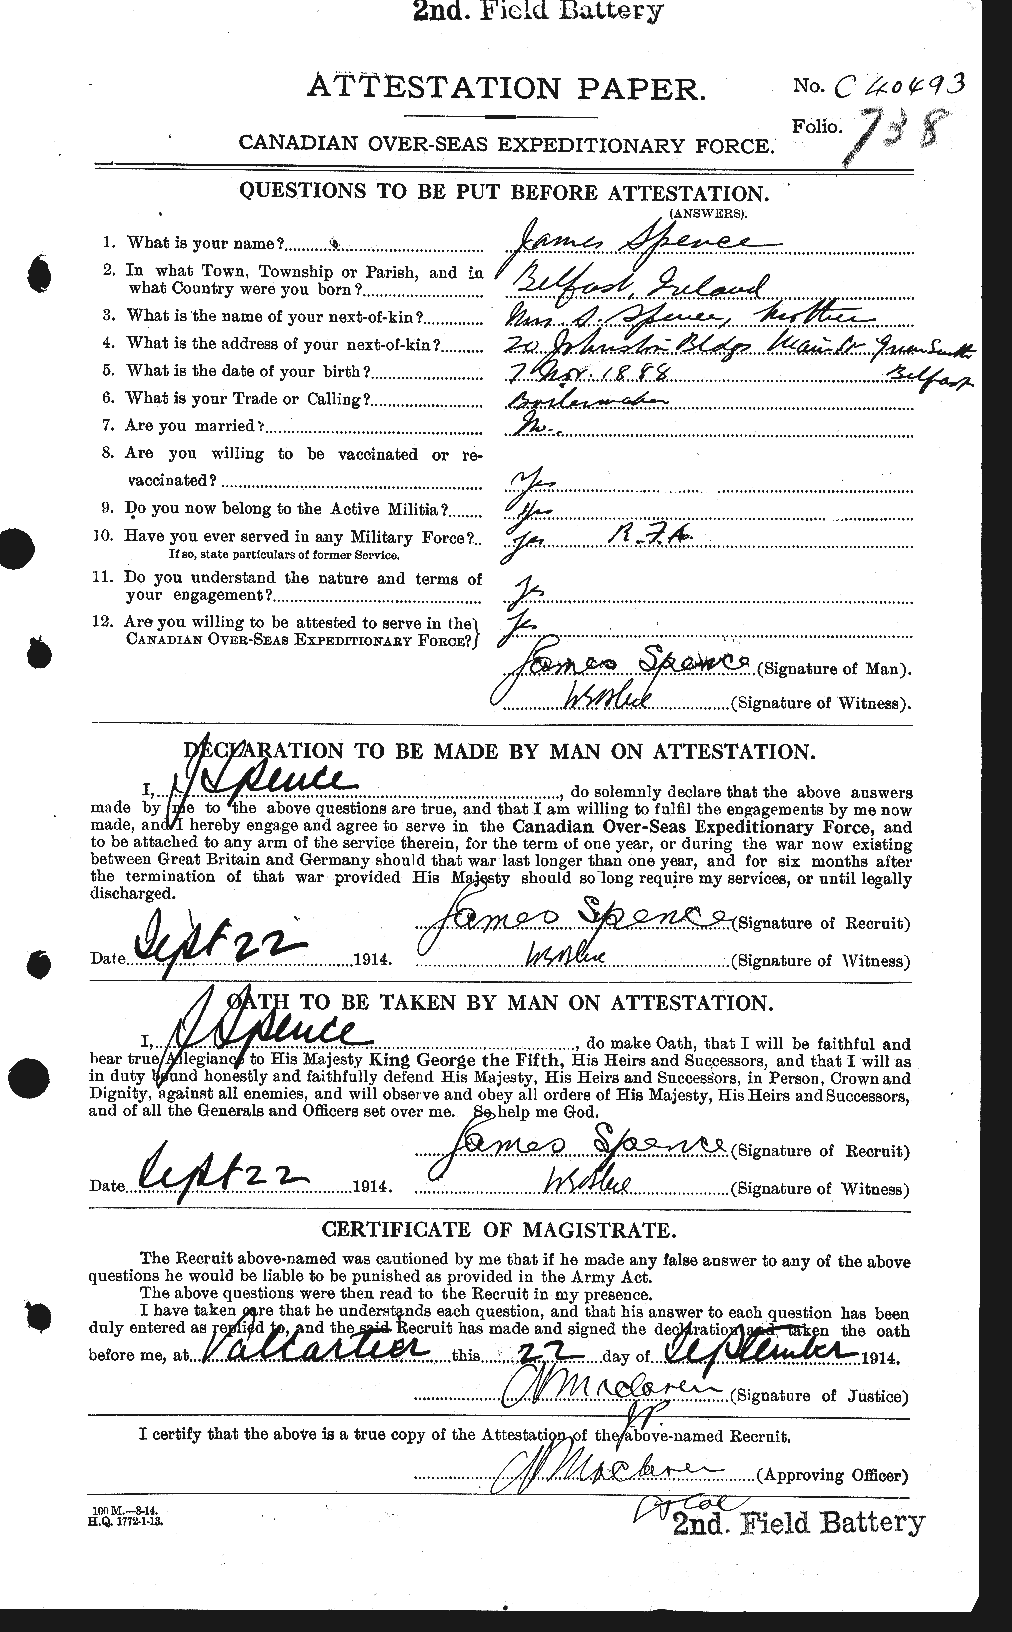 Personnel Records of the First World War - CEF 621346a